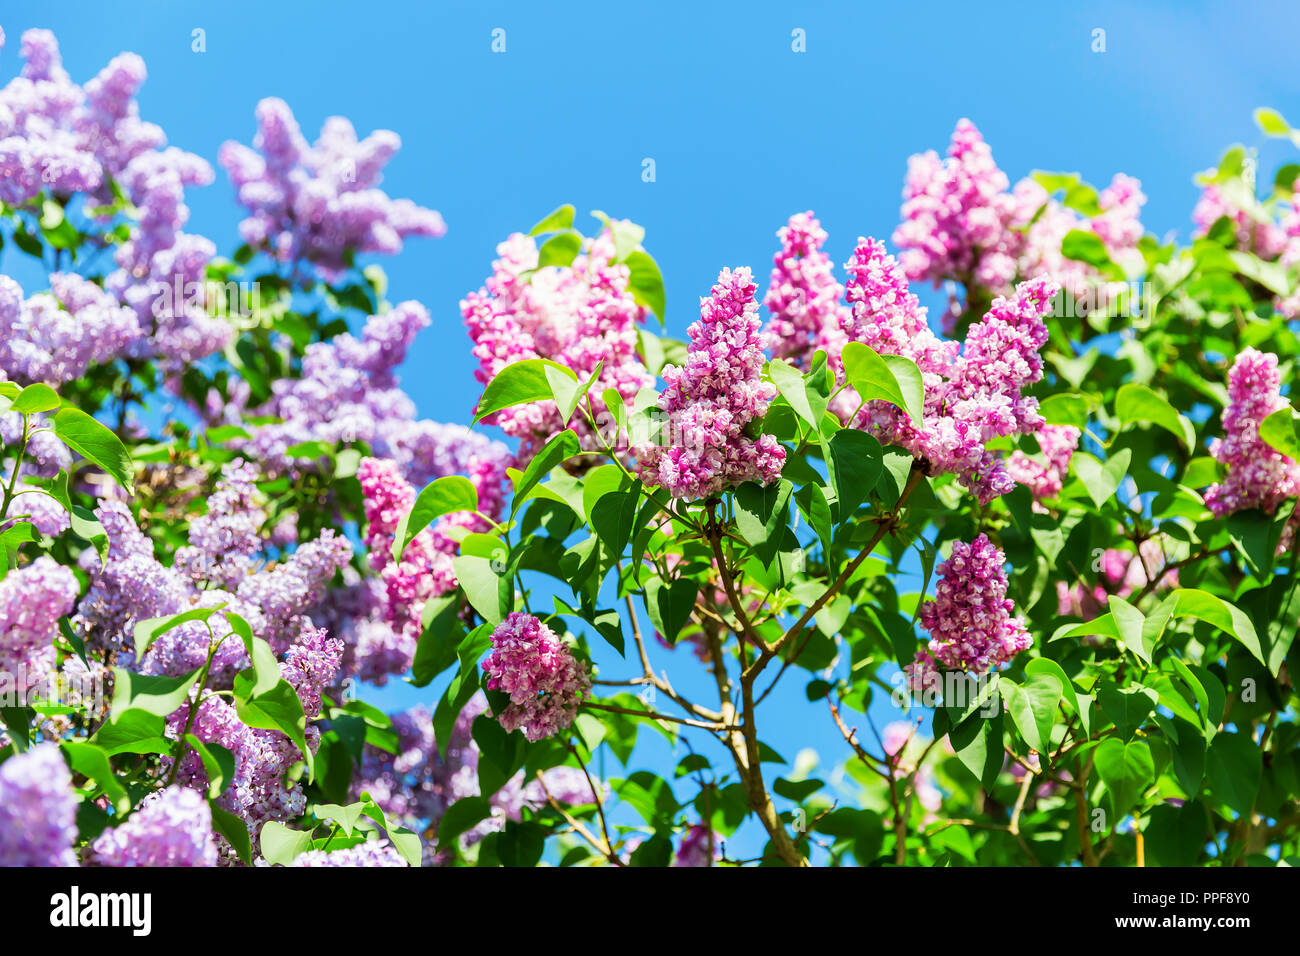 picture of lilac colored flowers at a lilac tree Stock Photo